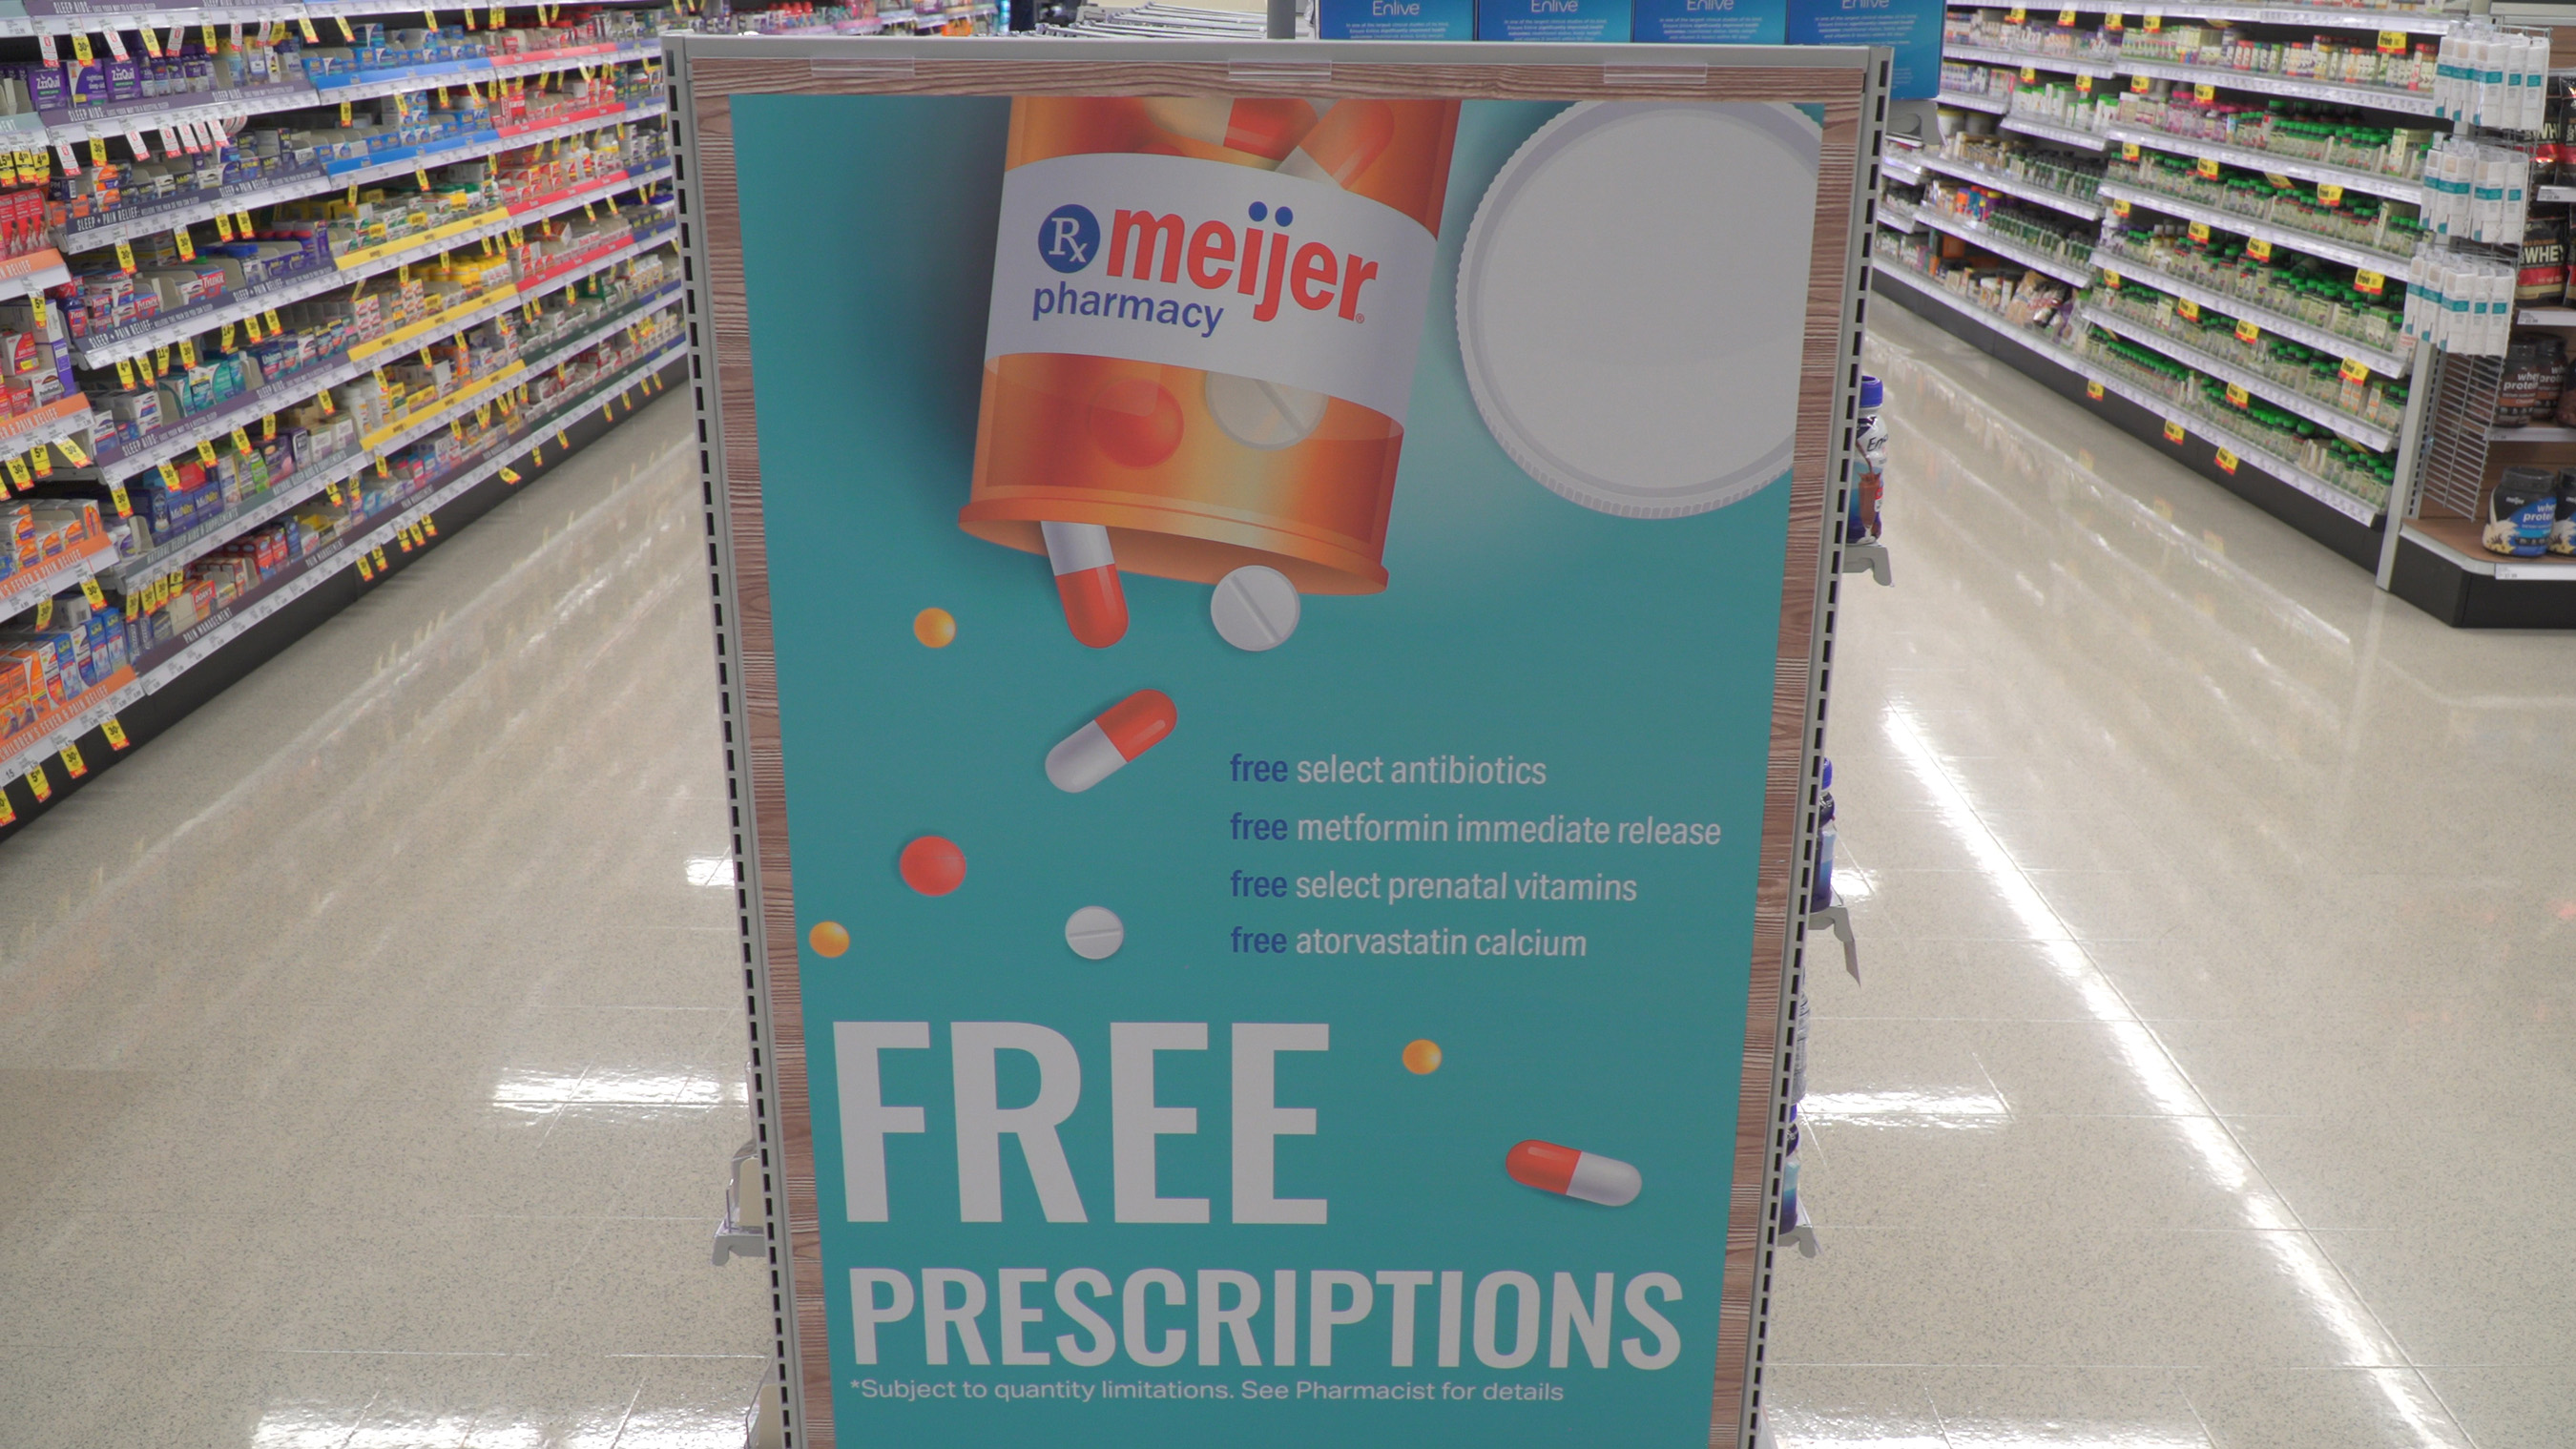 how long does meijer hold prescriptions